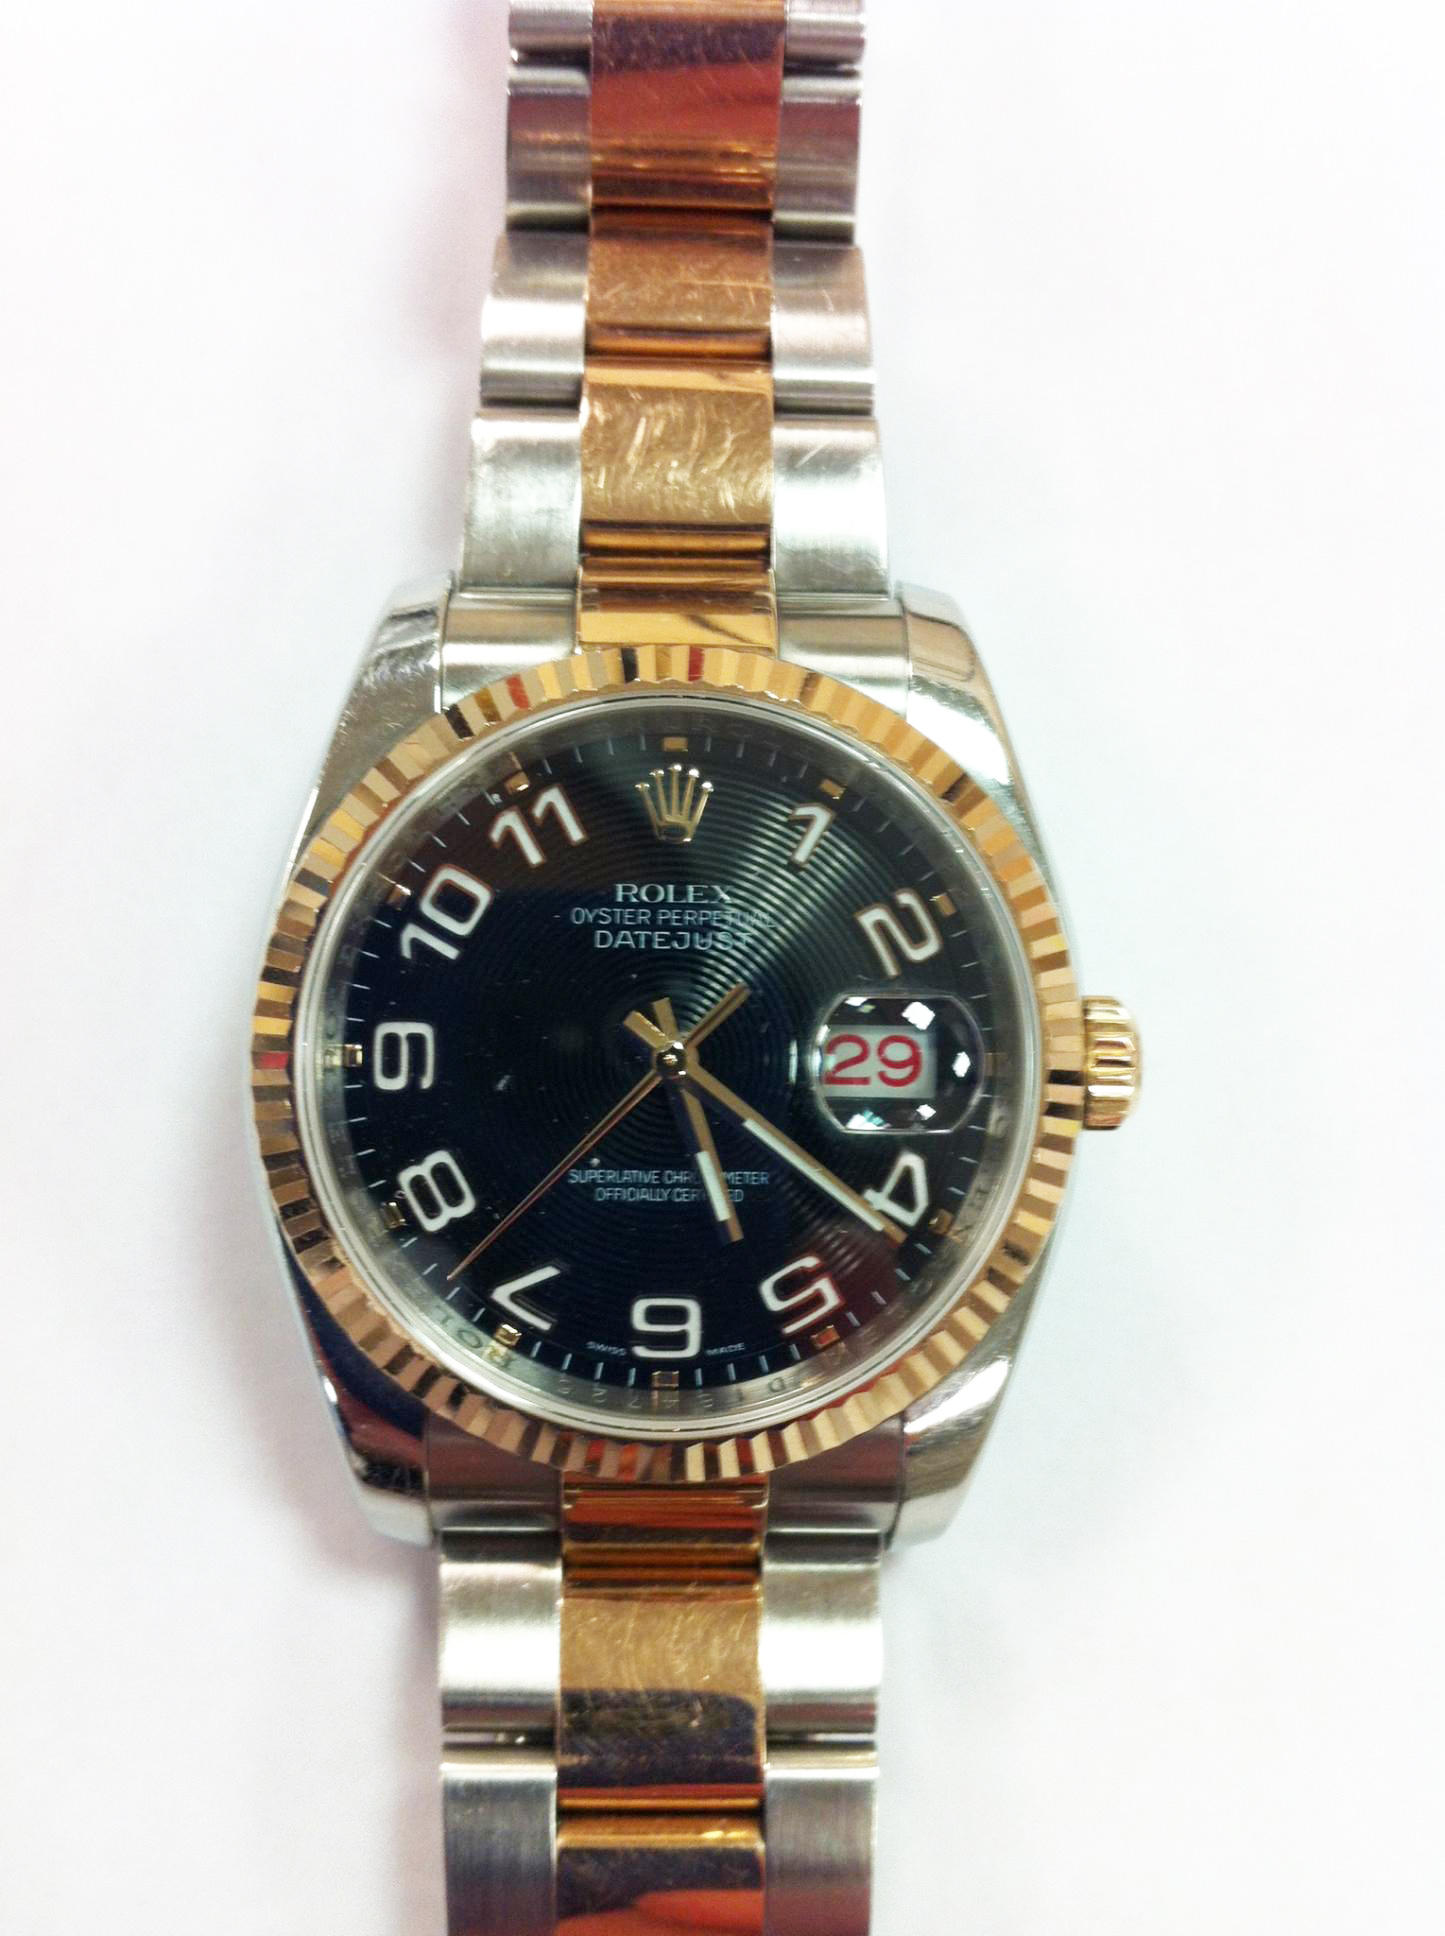 UNISEX ROLEX OYSTER PERPETUAL DATEJUST Auction Photo